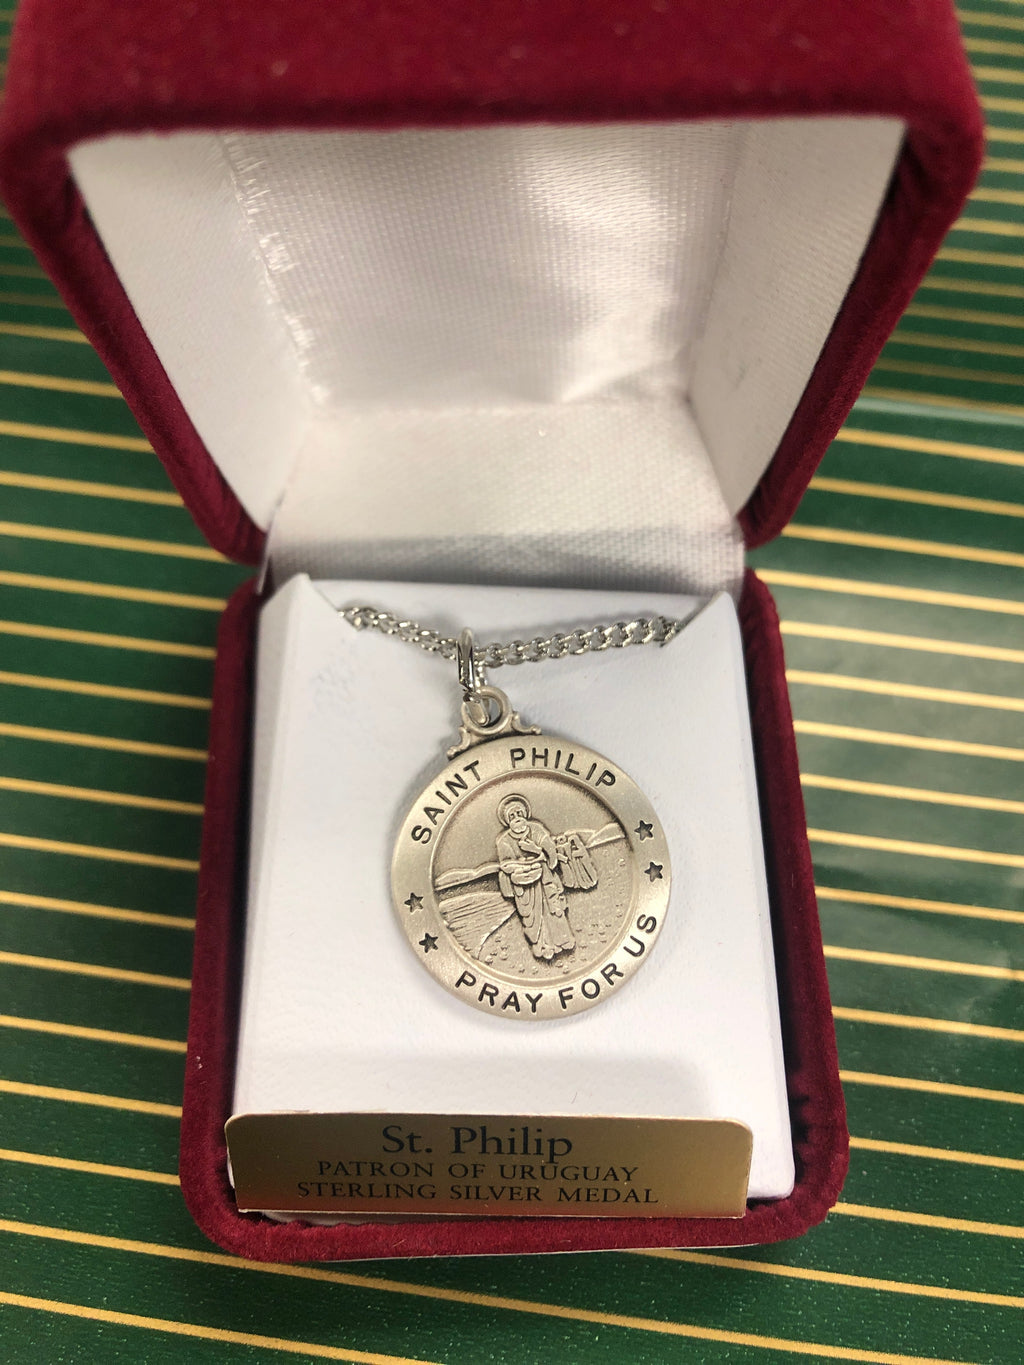 St. Philip sterling silver medal